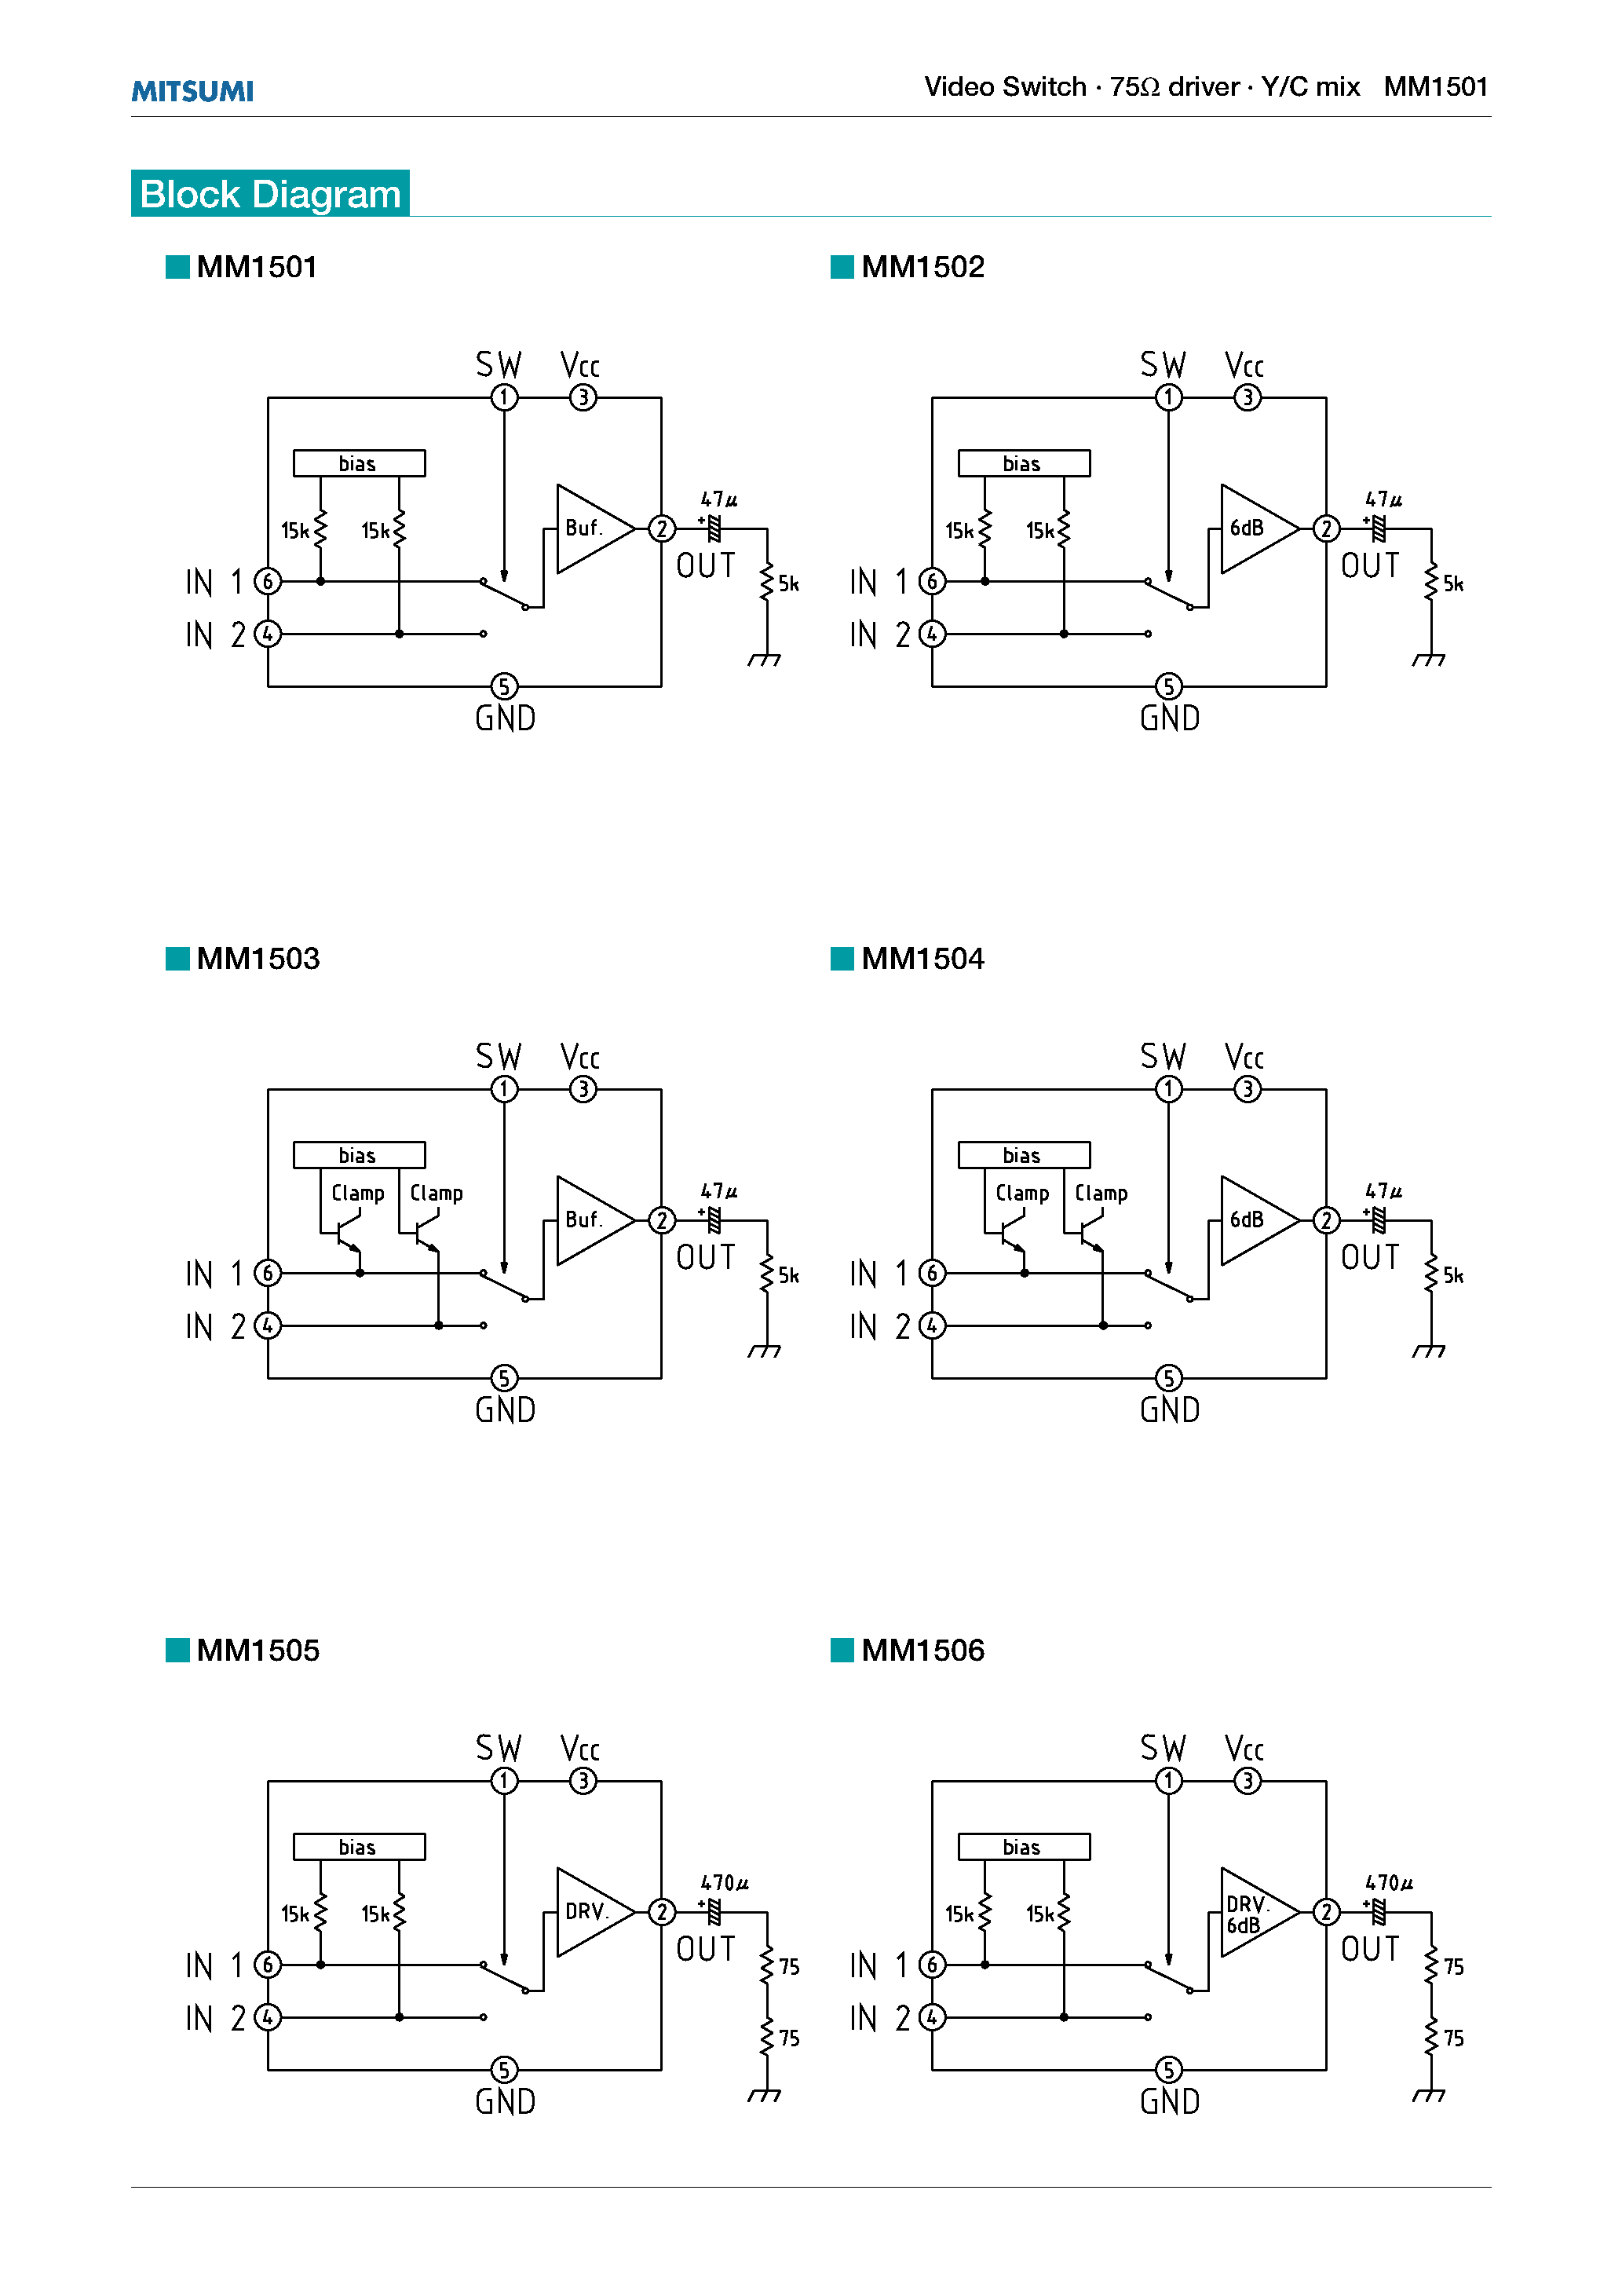 Datasheet MM1508 - Video Switch 75 driver Y/C mix page 2